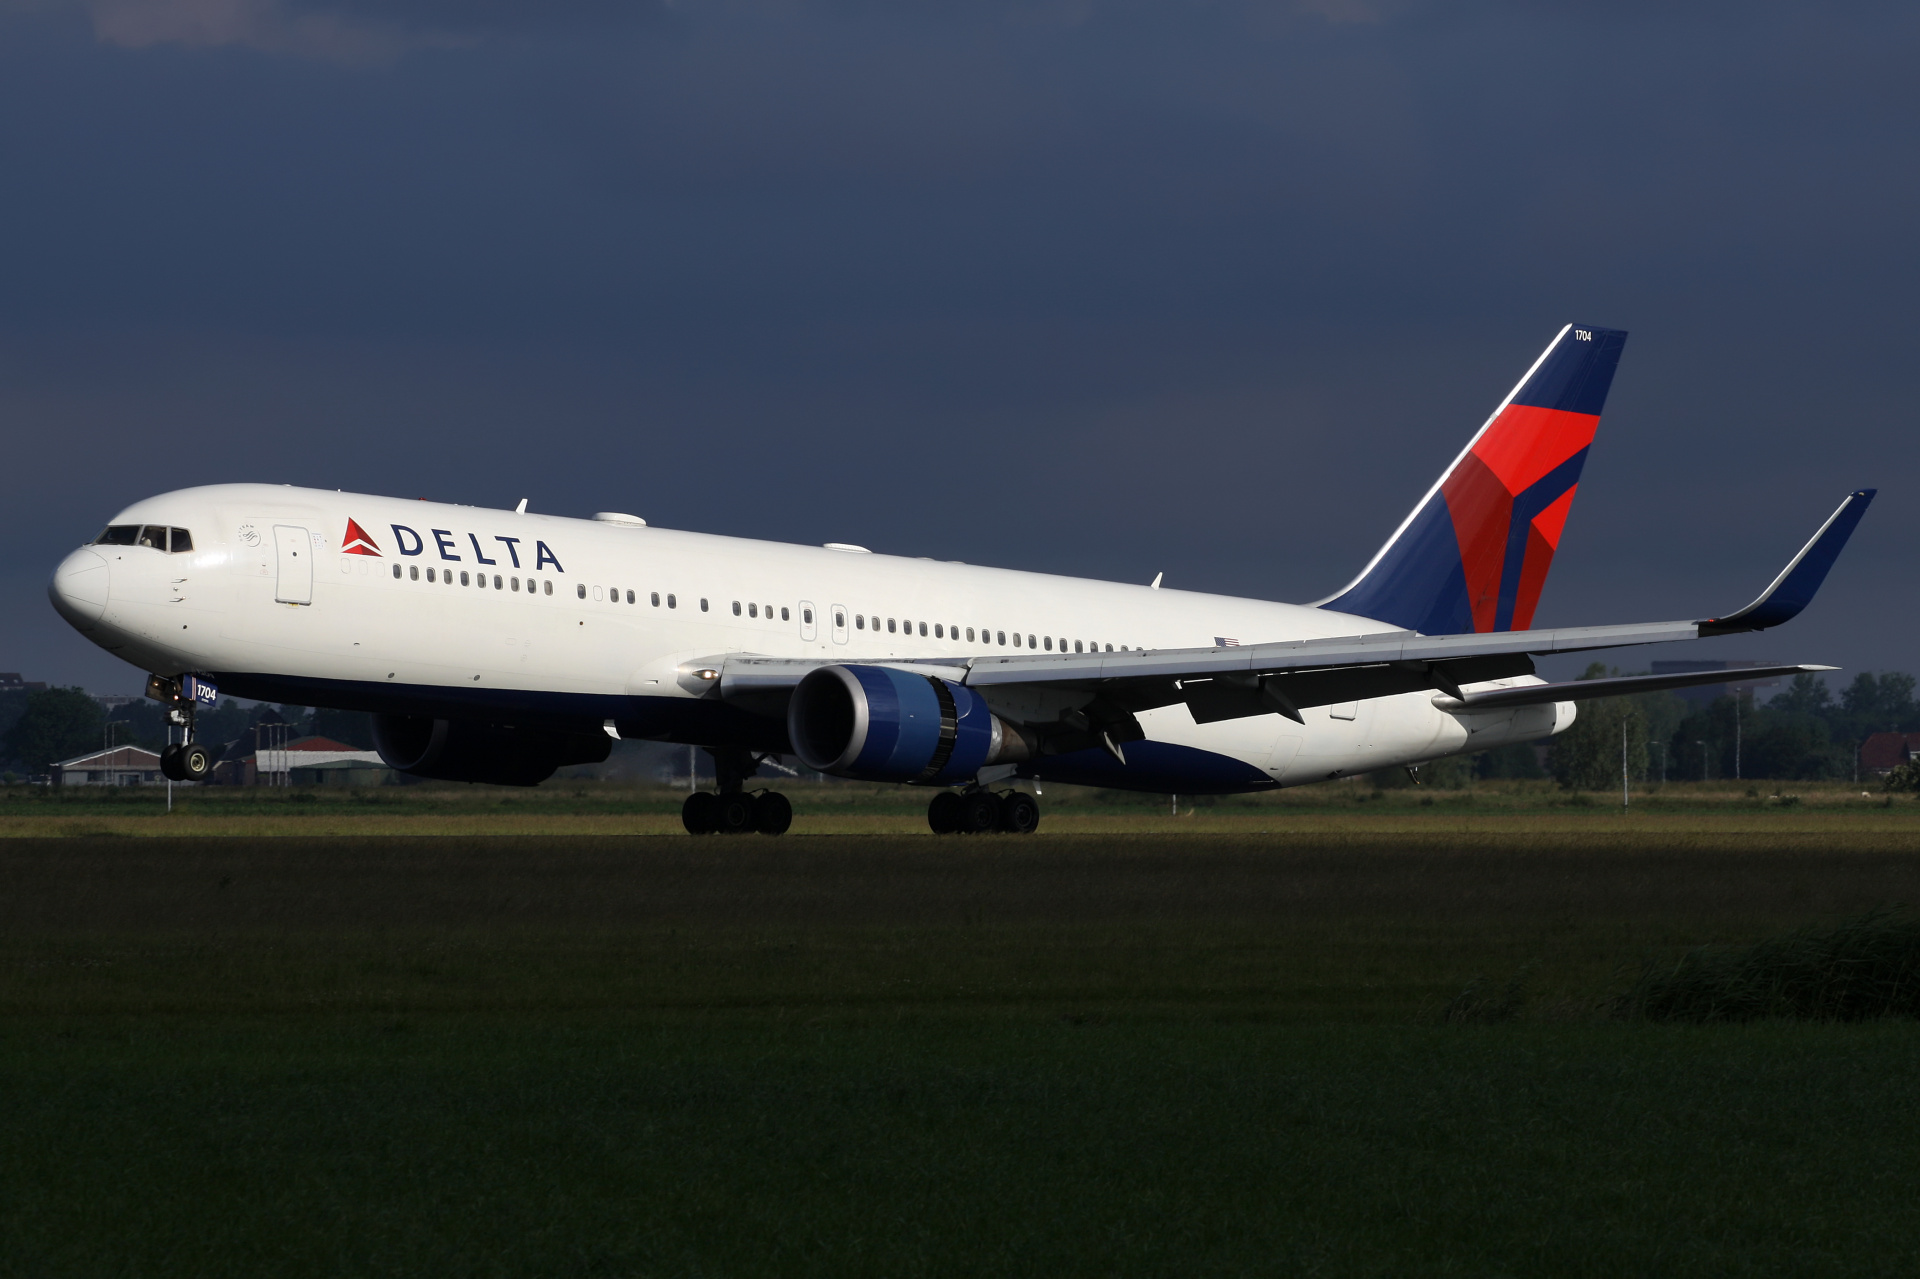 N1704 (Aircraft » Schiphol Spotting » Boeing 767-300 » Delta Airlines)